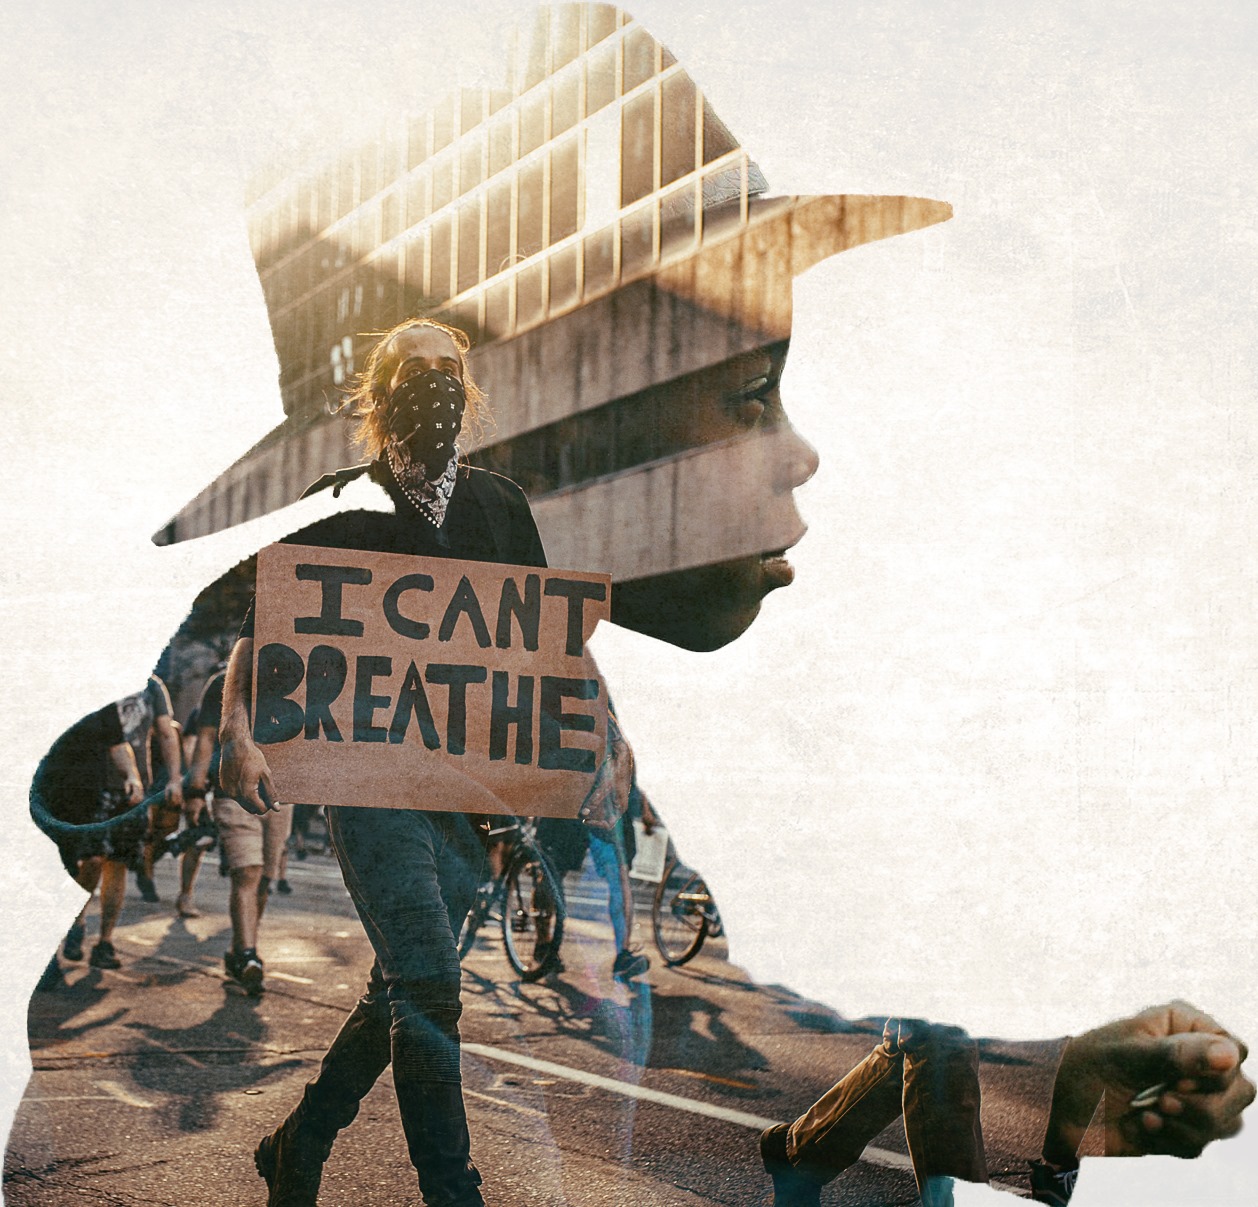 I can't breathe double exposure image of a black boy with a peaceful demonstrator with a sign that says "I can't breathe"